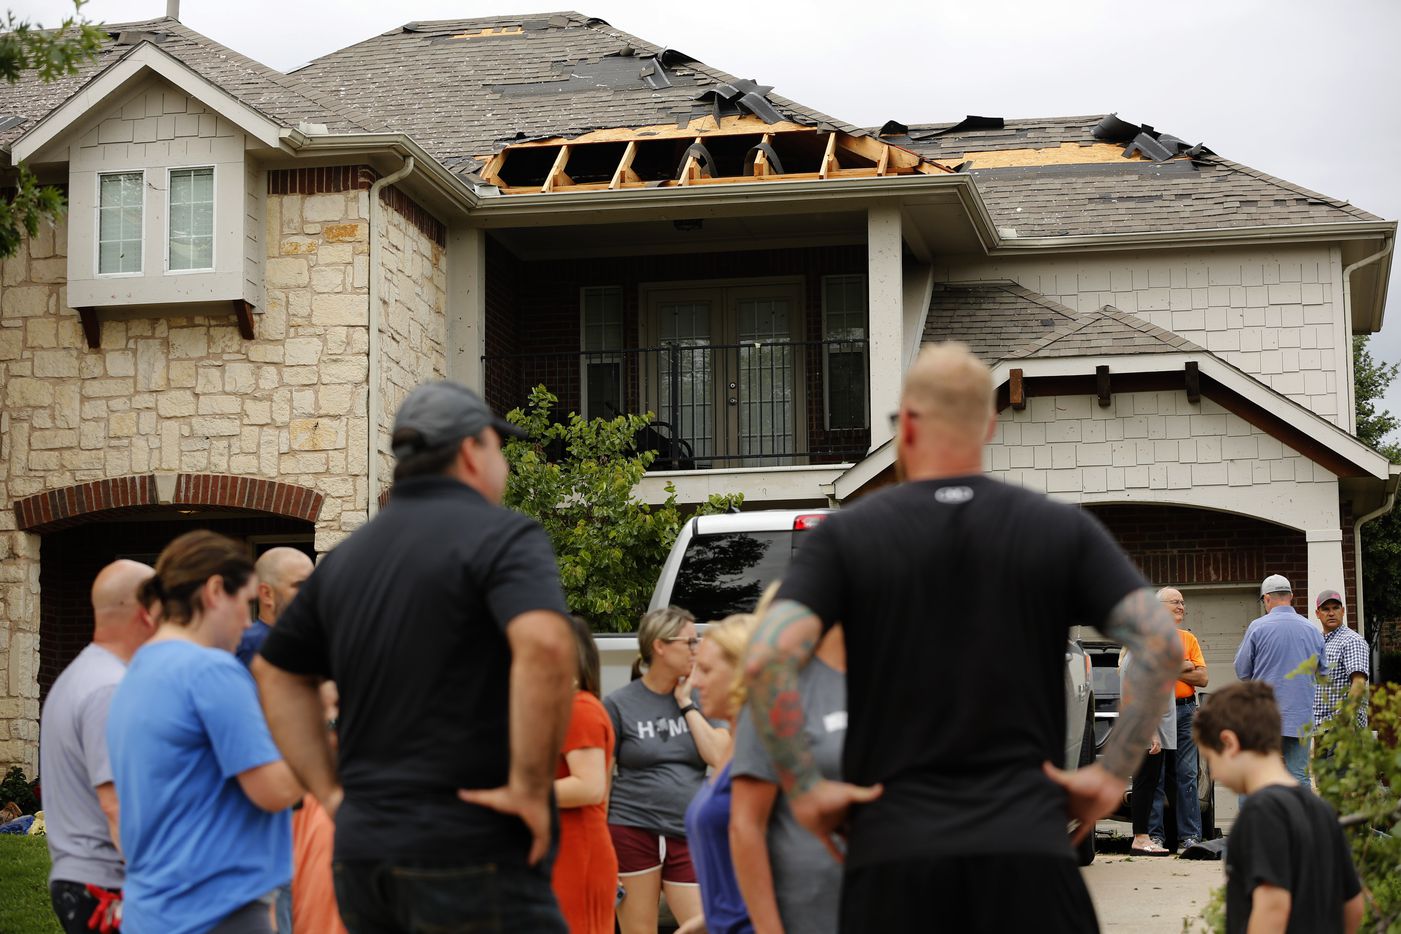 Neighbors visit outside a wind-damaged home on Oliver Dr. in North Fort Worth, after winds toppled trees and torn shingles off of homes, Wednesday, May 29, 2019. A tornado warned storm passed through the neighborhood near Heritage Trace Pkwy and N. Riverside Dr. 